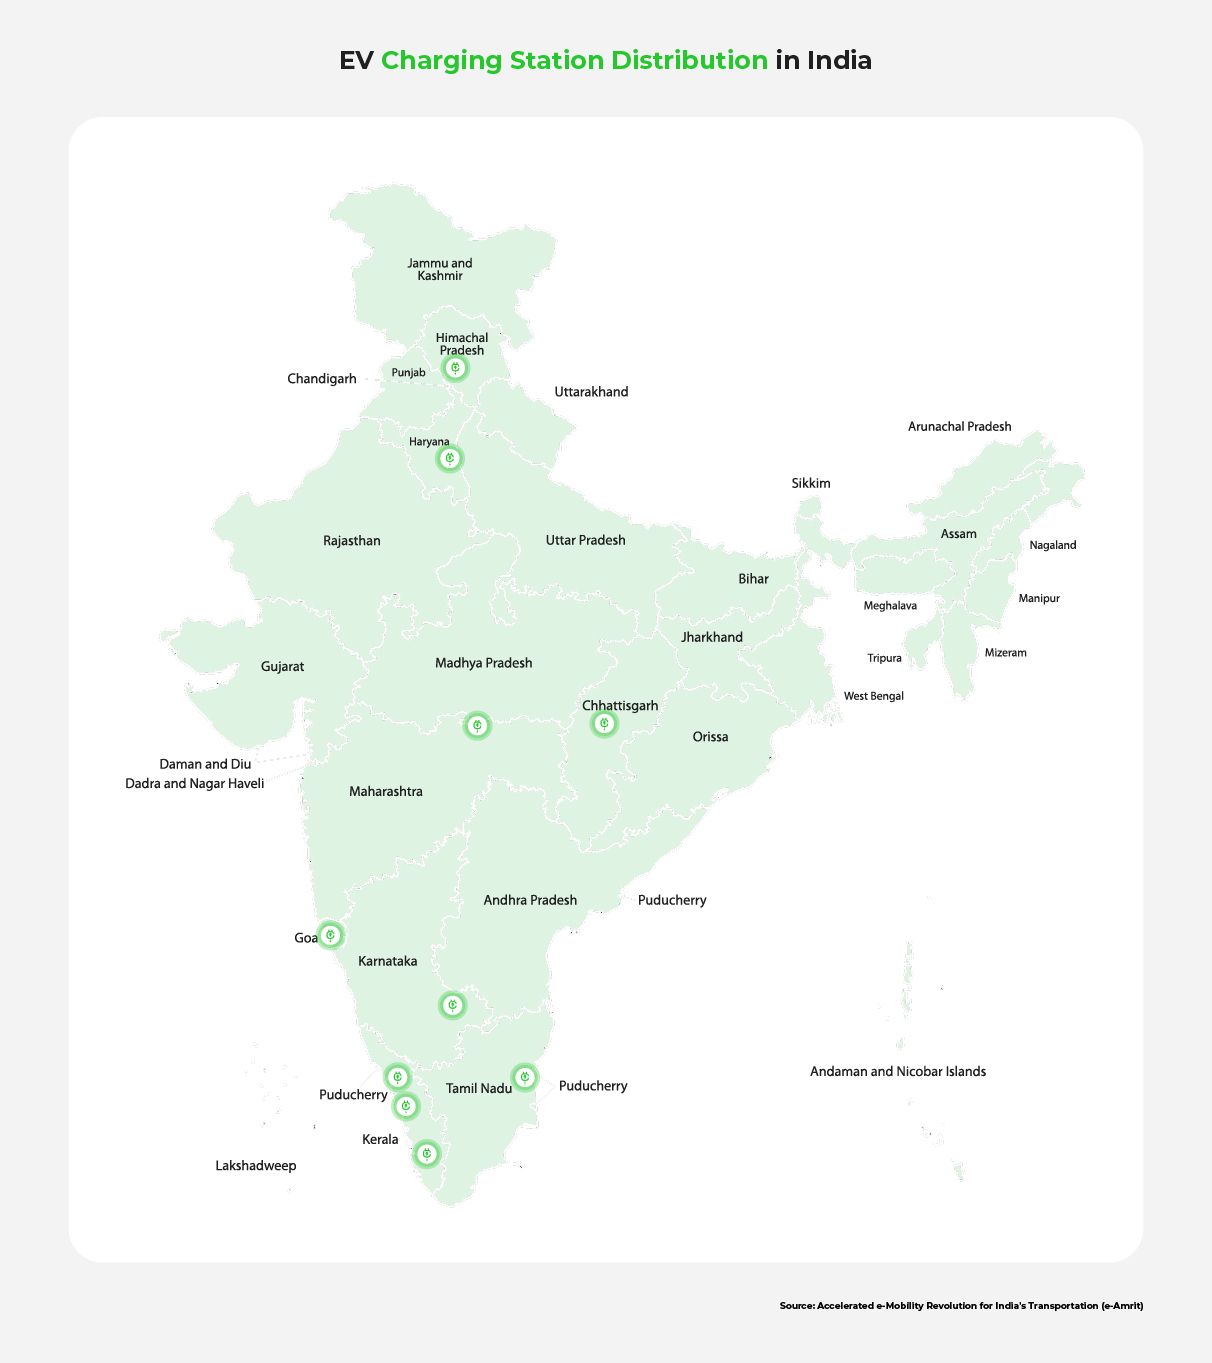  Map showing the uneven distribution of charging stations across India.